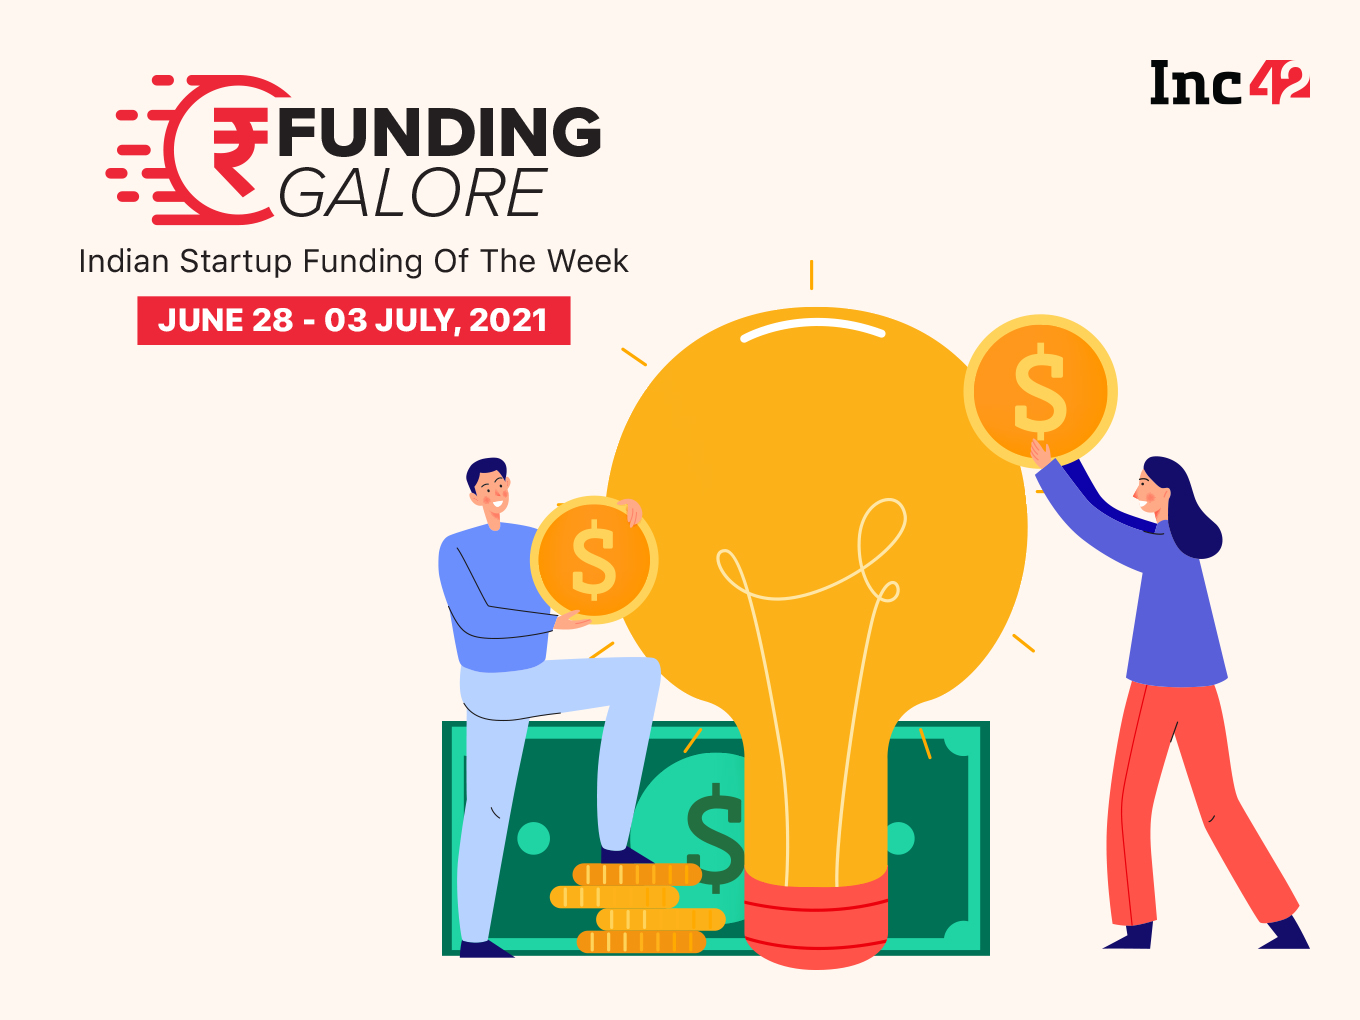 Funding Galore: From Digit Insurance To Licious — Over $750 Mn Raised By Indian Startups This Week